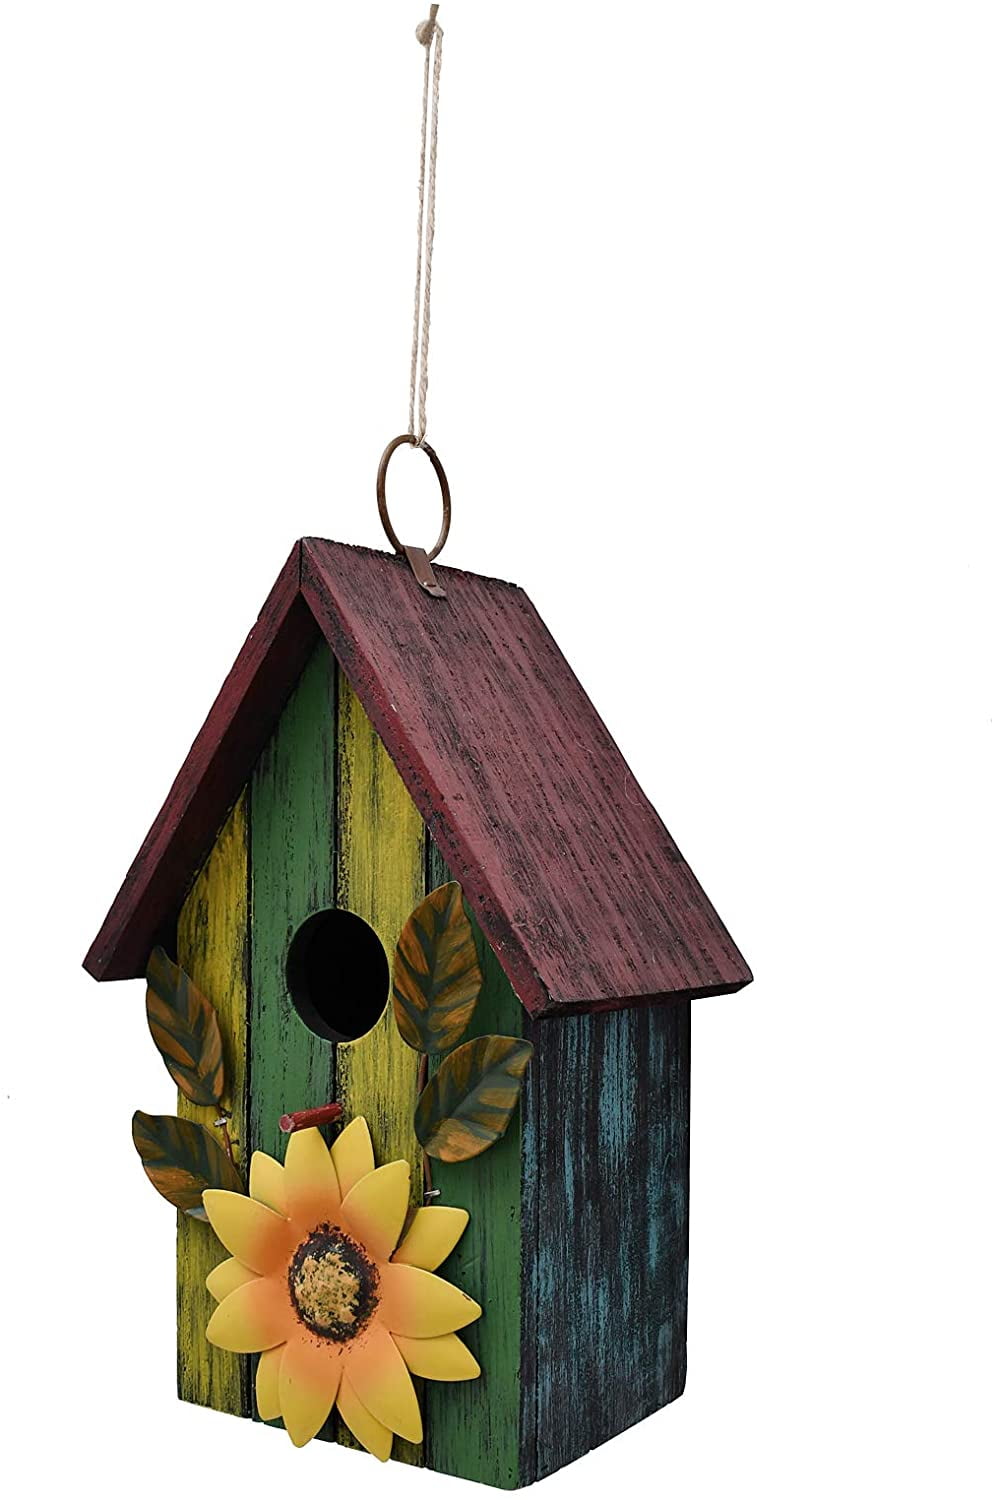 Birdhouse Soft Wood handpainted by me Small sits/can hang deco bird Choose 1 